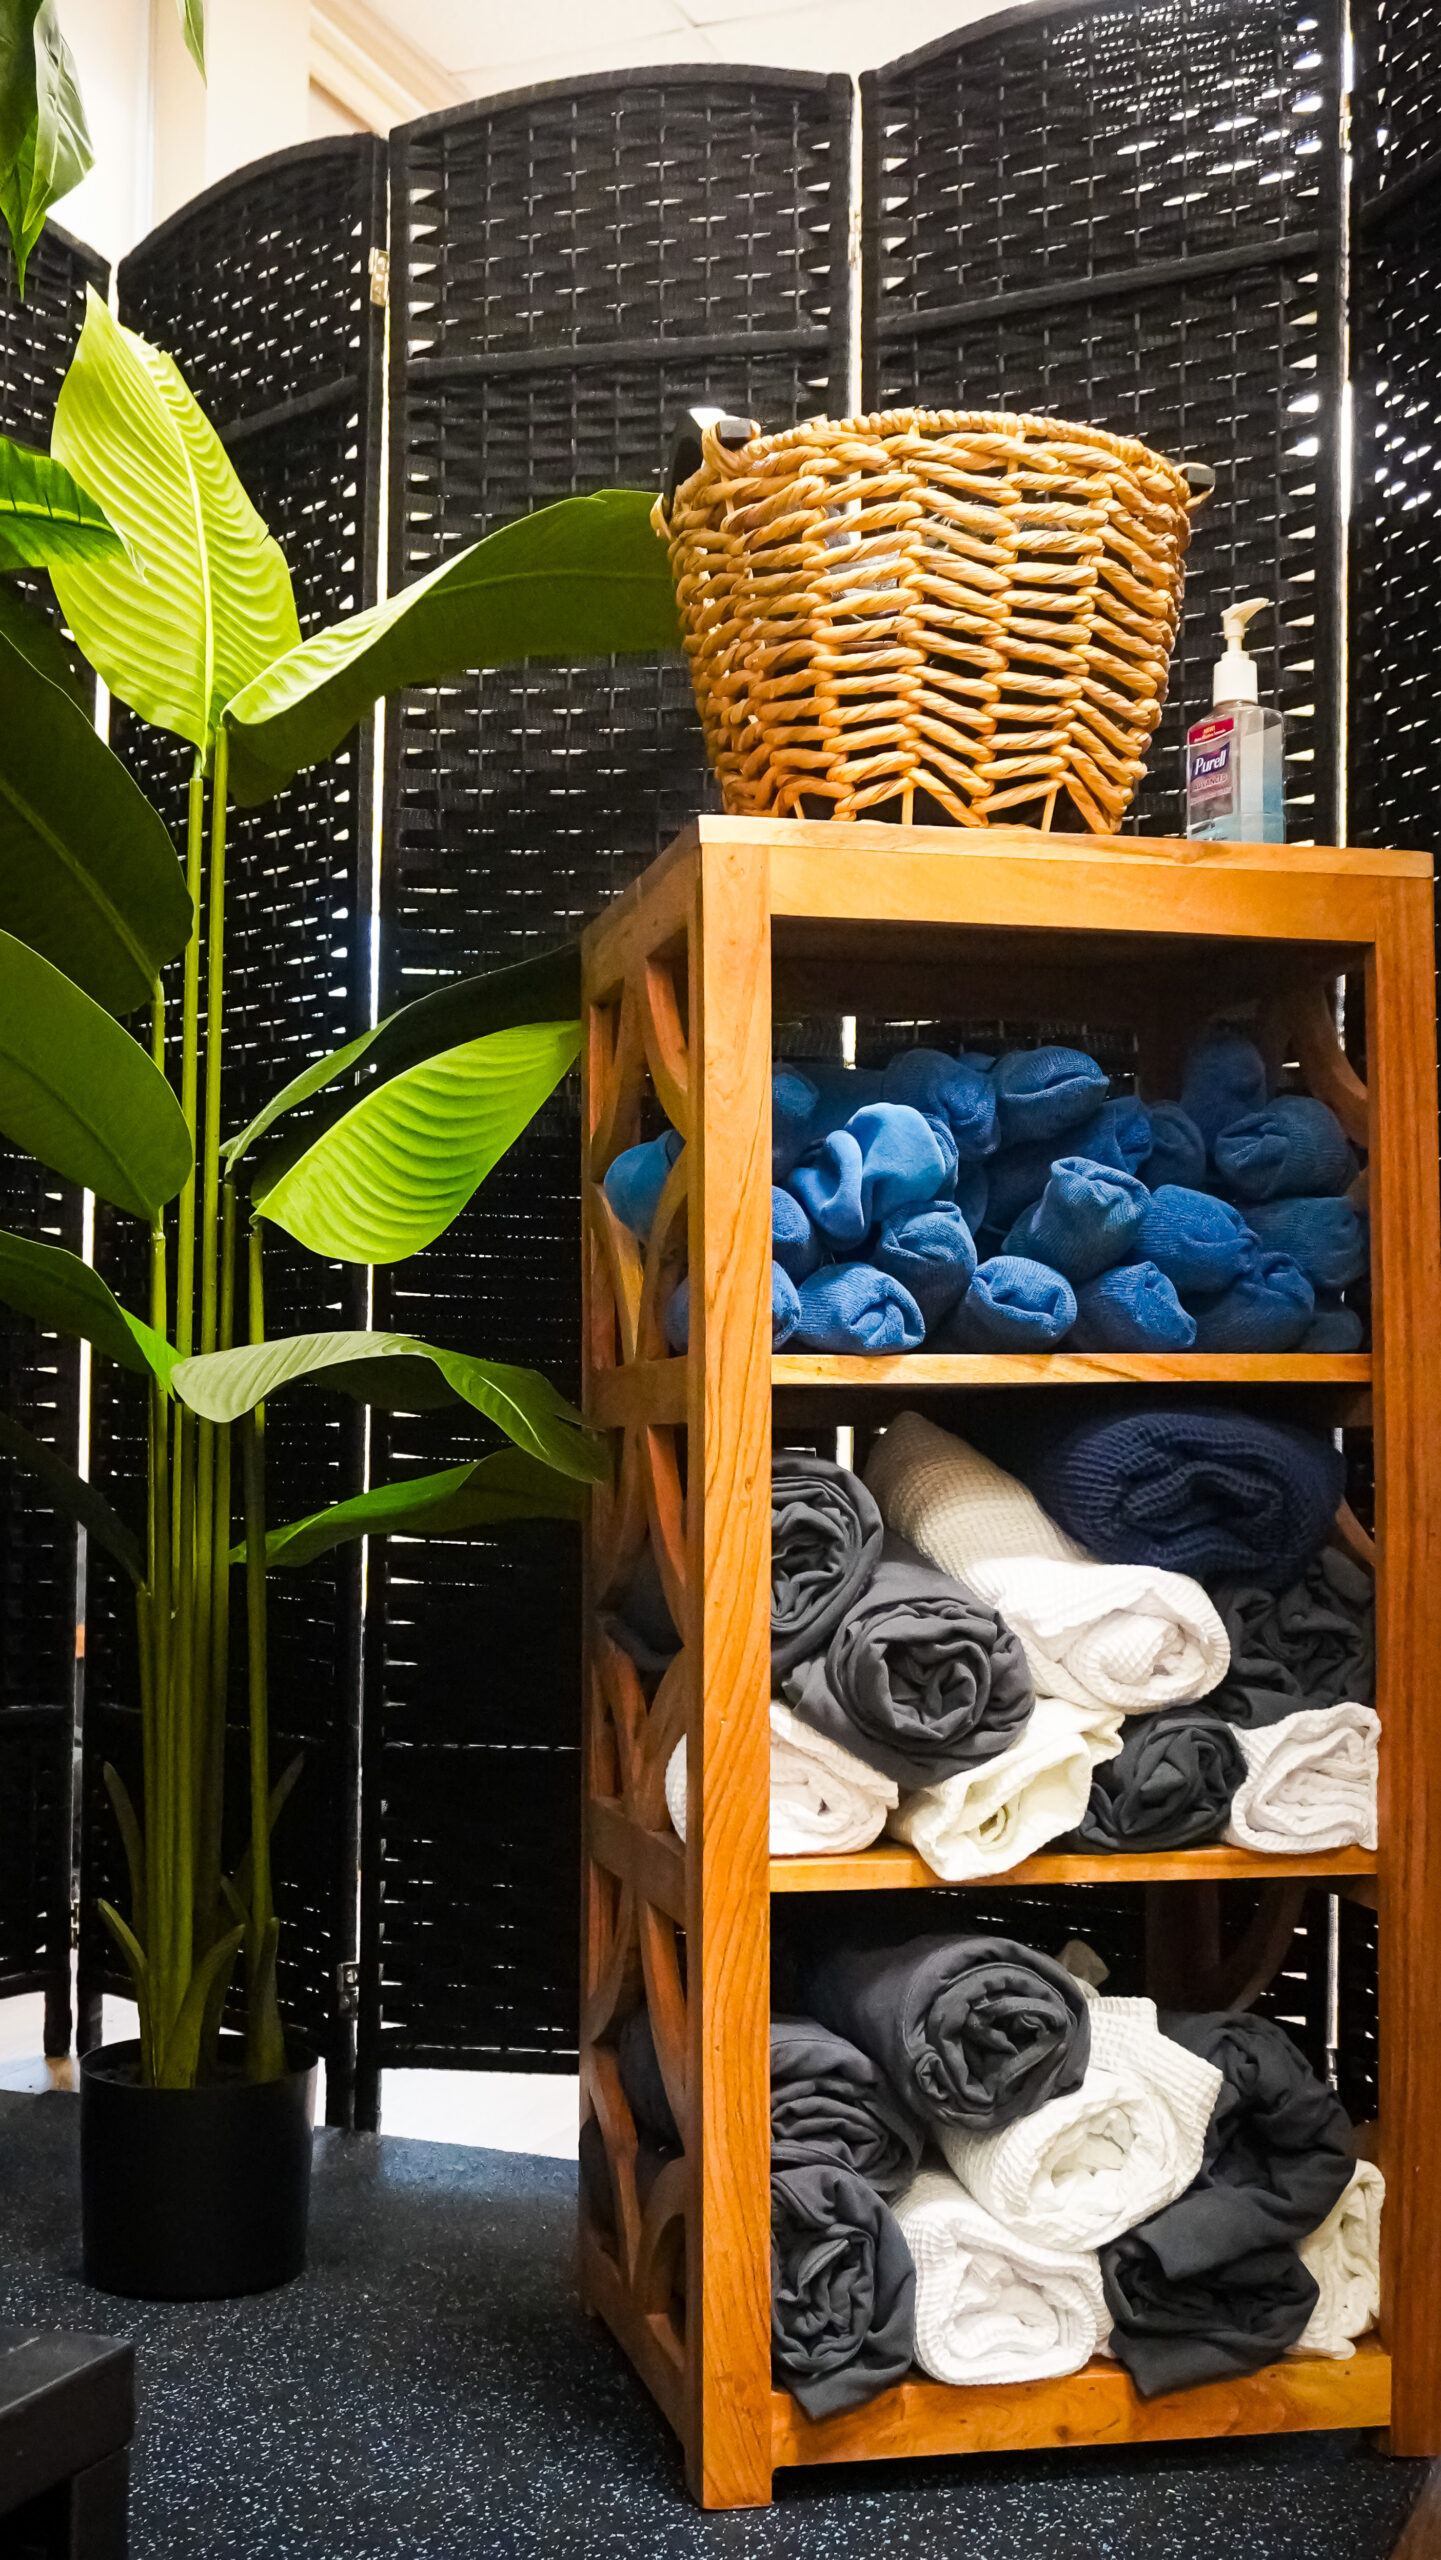 Photo of towels and garments for the sauna.